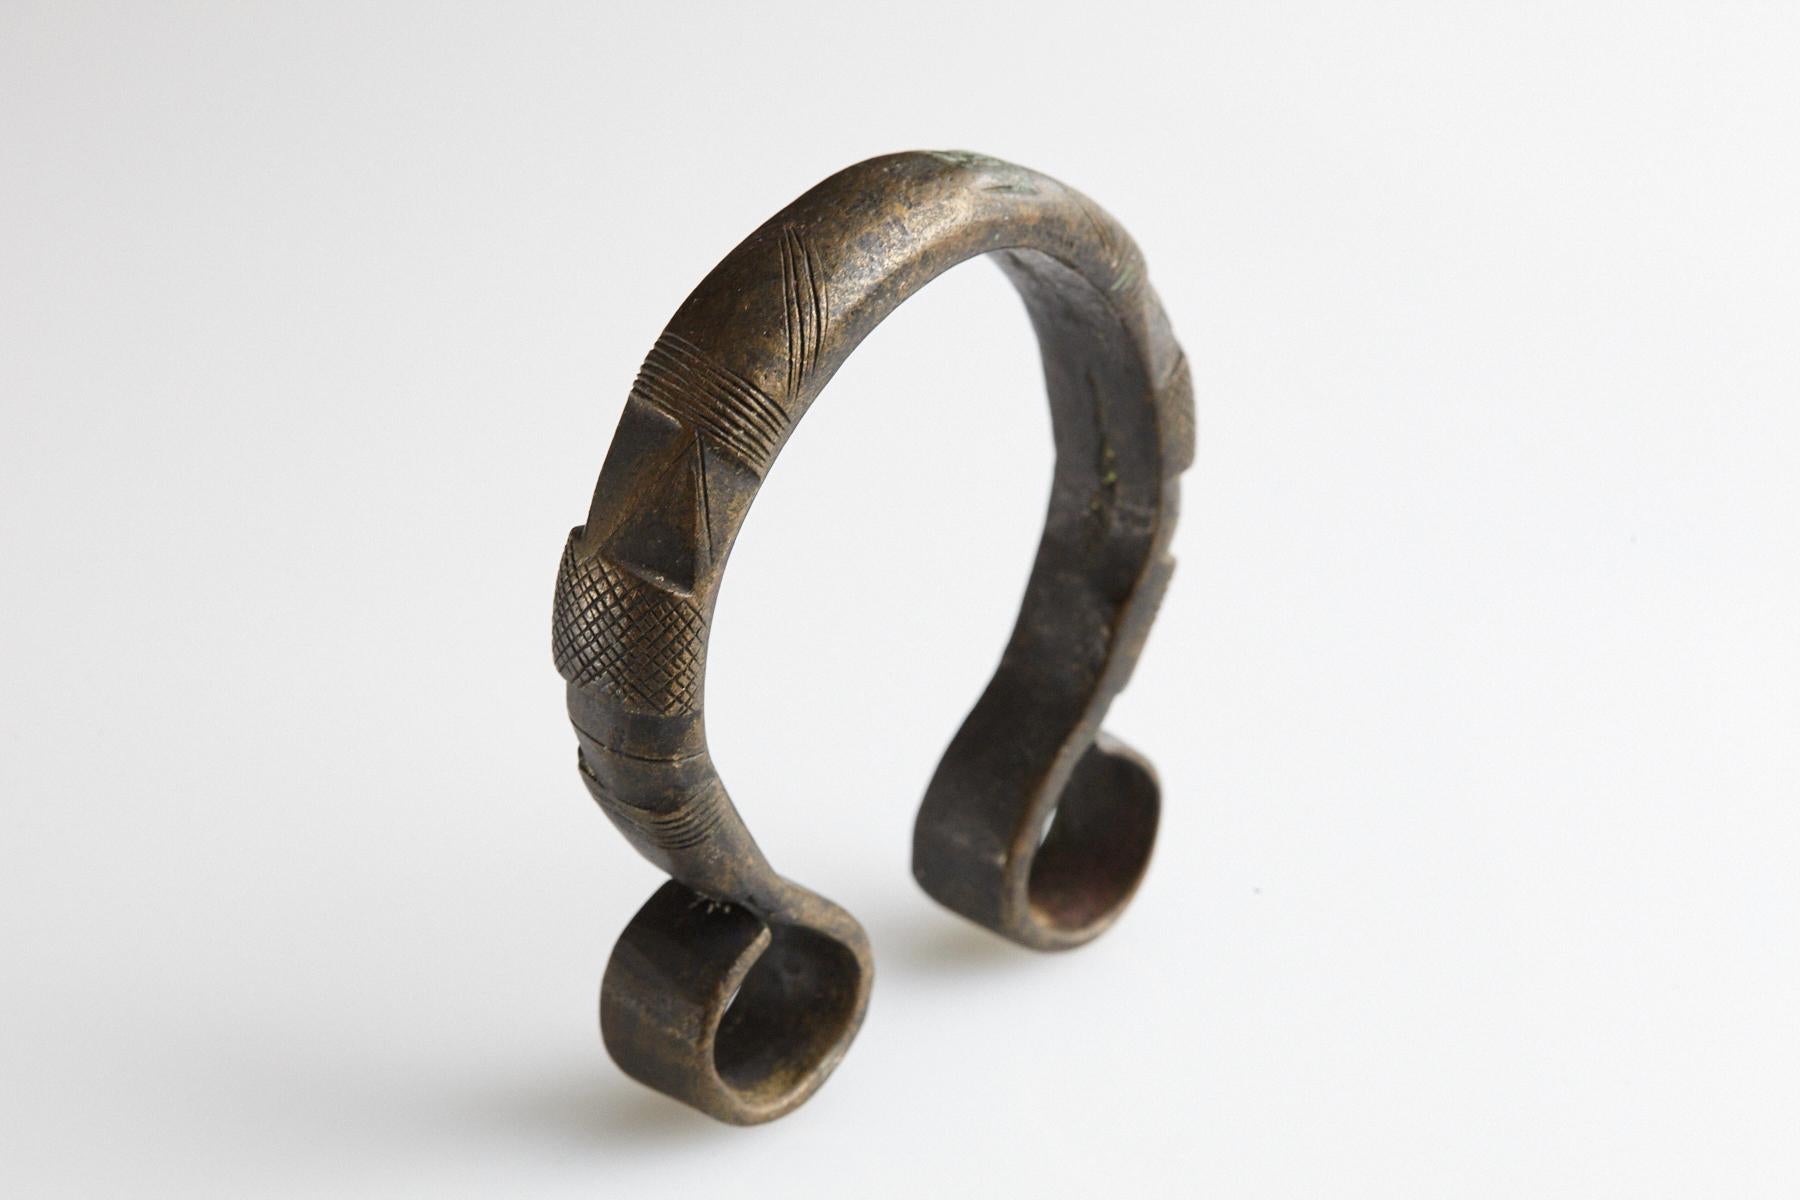 Solid Brass Currency Bracelet/Manilla, Gurma People, Burkina Faso, Early 20th C For Sale 2